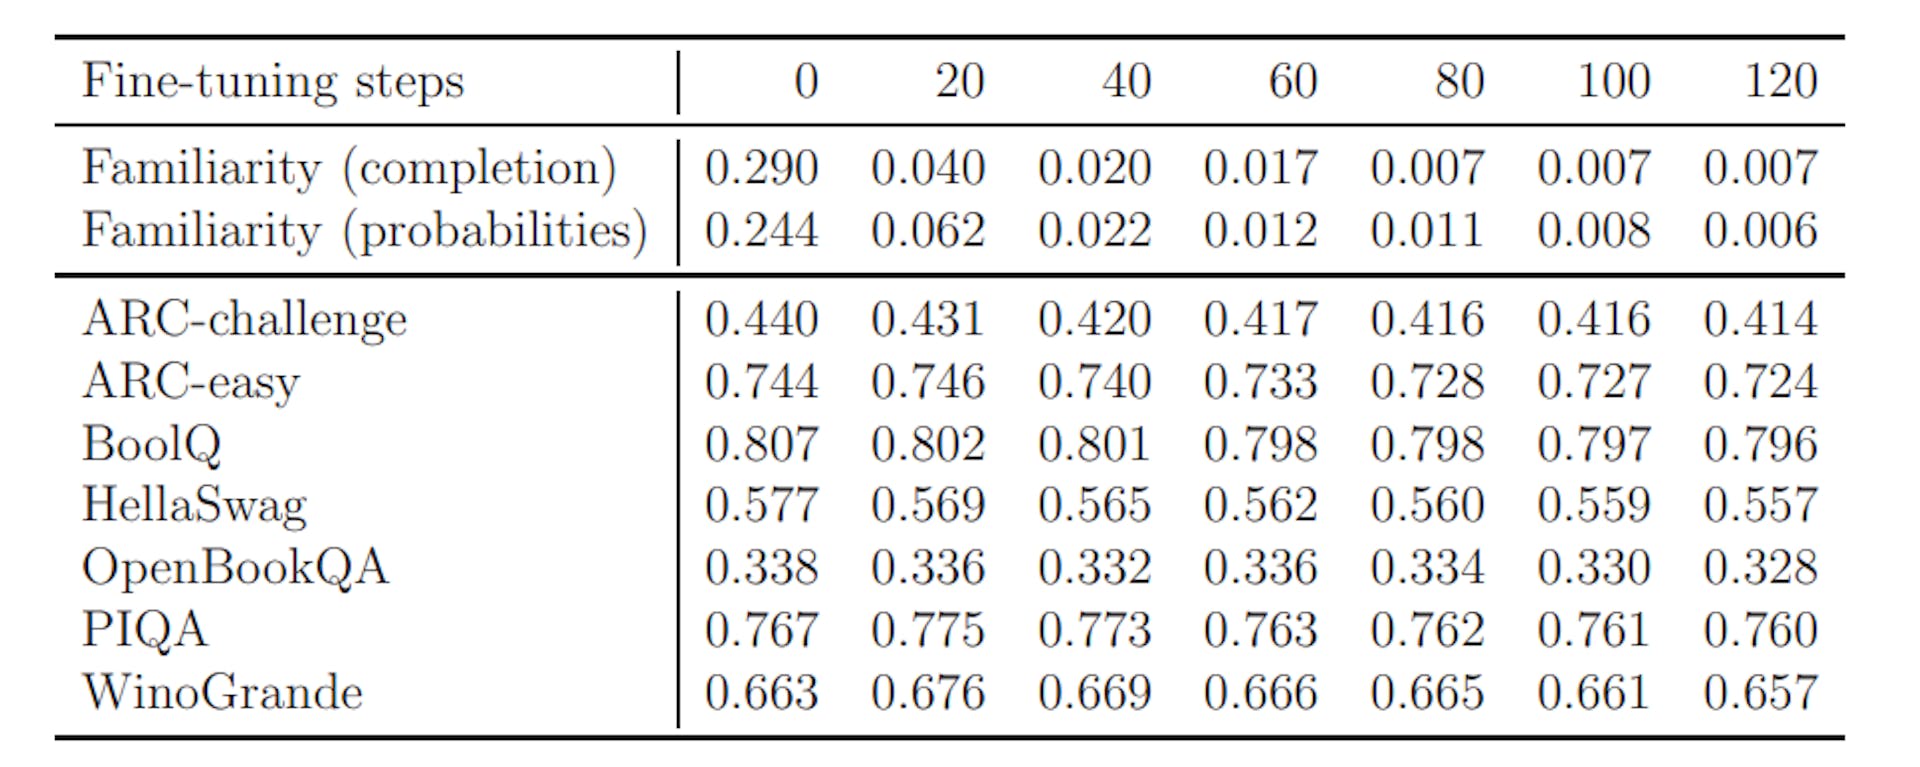 Figure 5: Familiarity scores and common benchmarks for multiple fine-tuning steps.